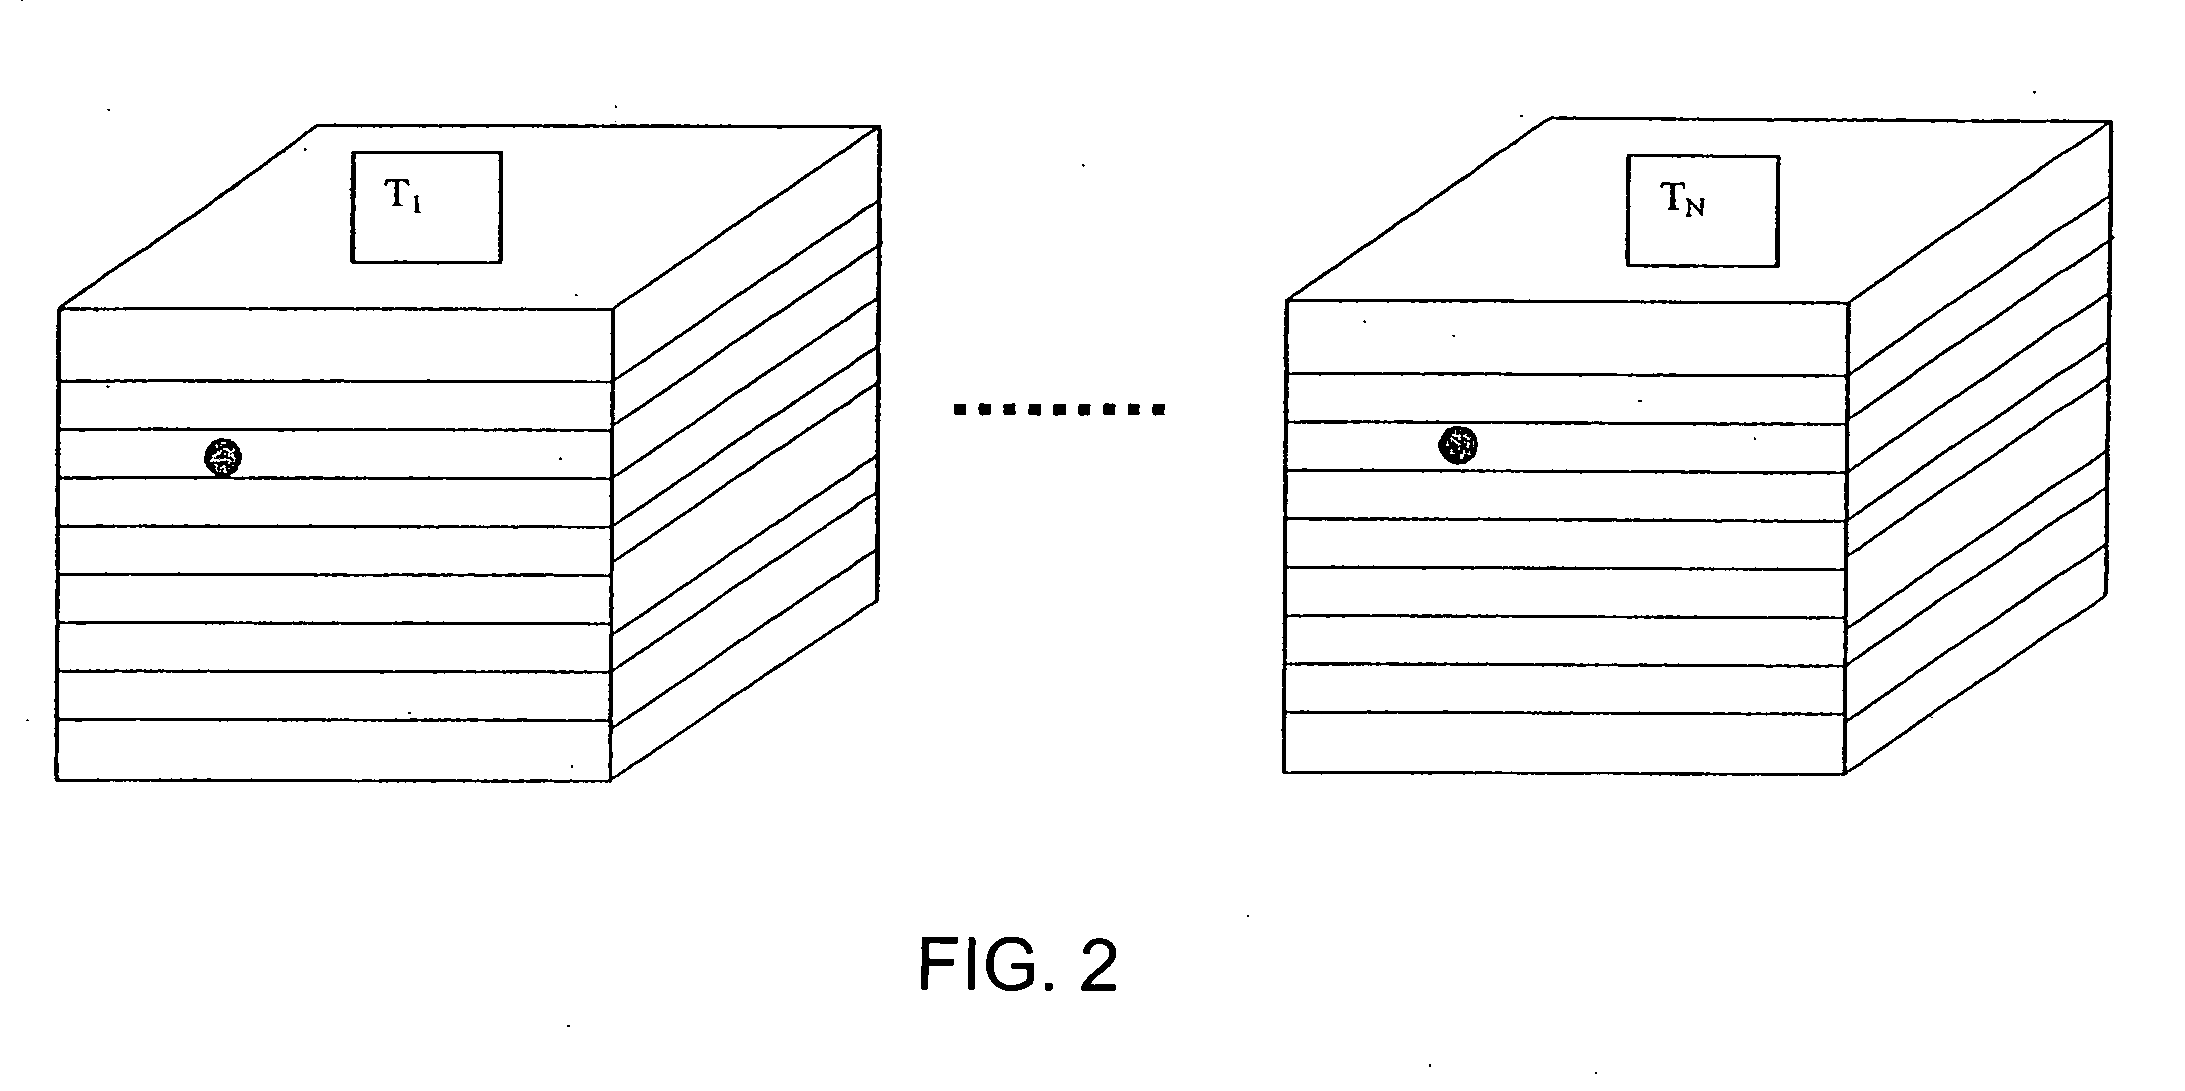 Computer-aided detection system utilizing temporal analysis as a precursor to spatial analysis